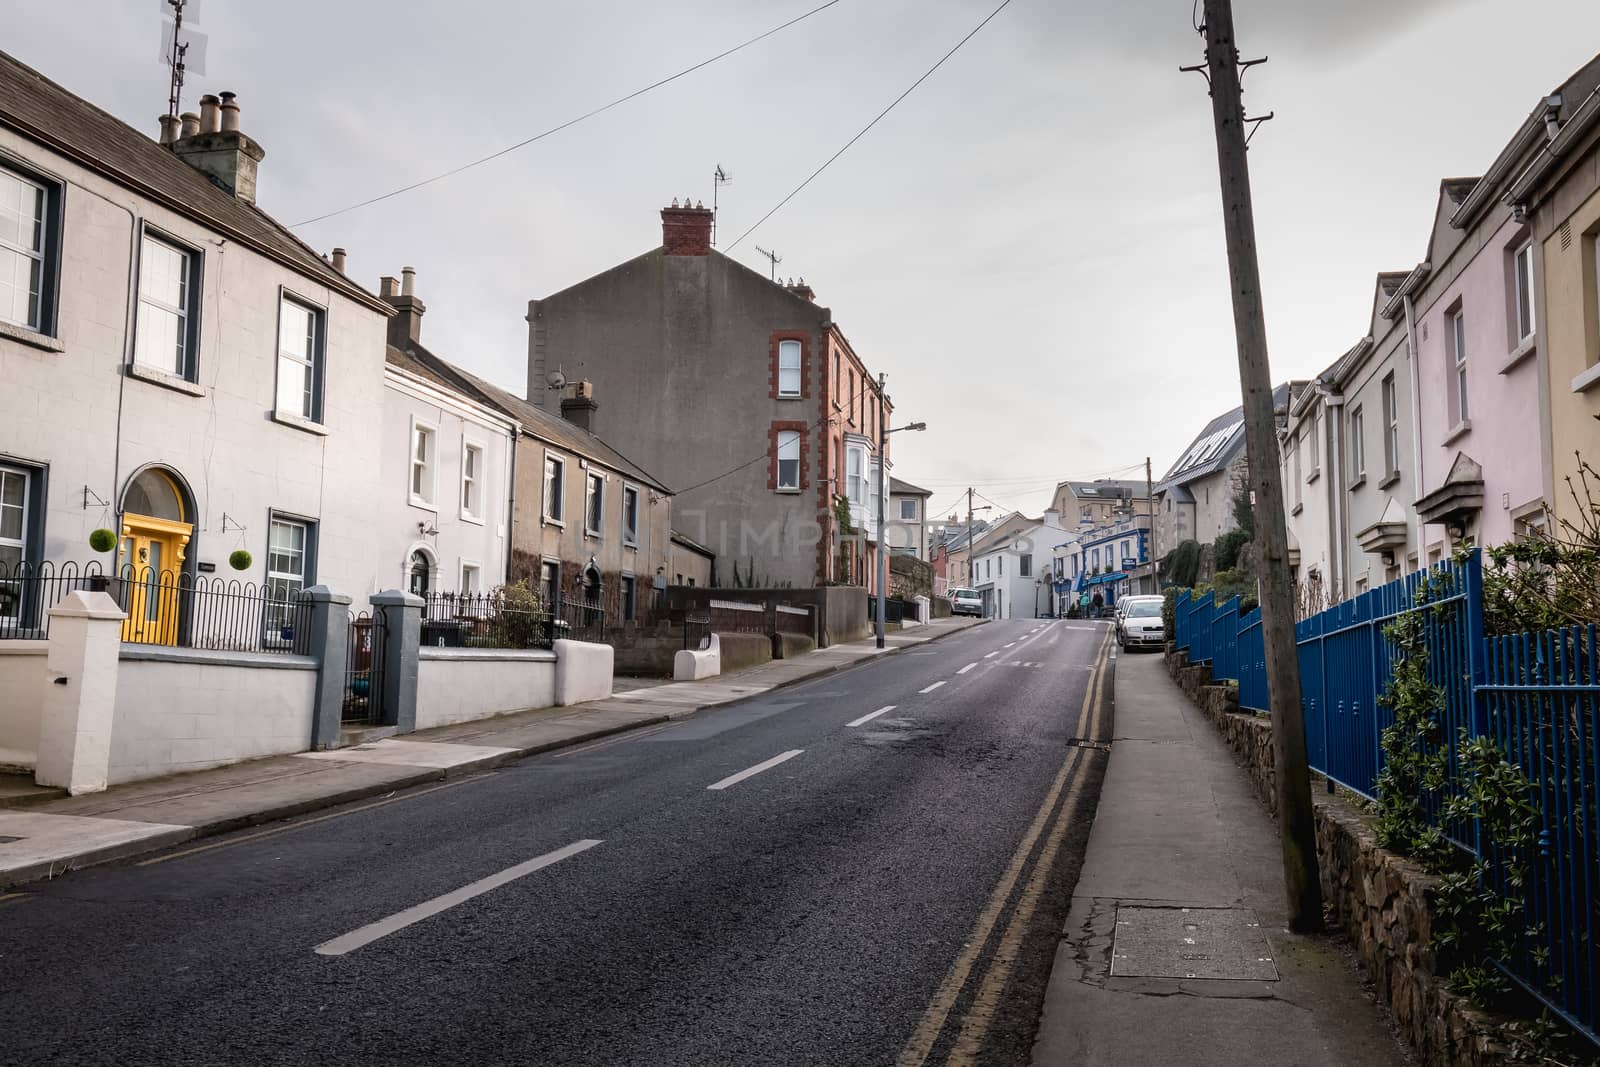 Howth, Ireland - February 15, 2019: Typical architecture of town center houses in a small fishing port near Dublin on a winter day